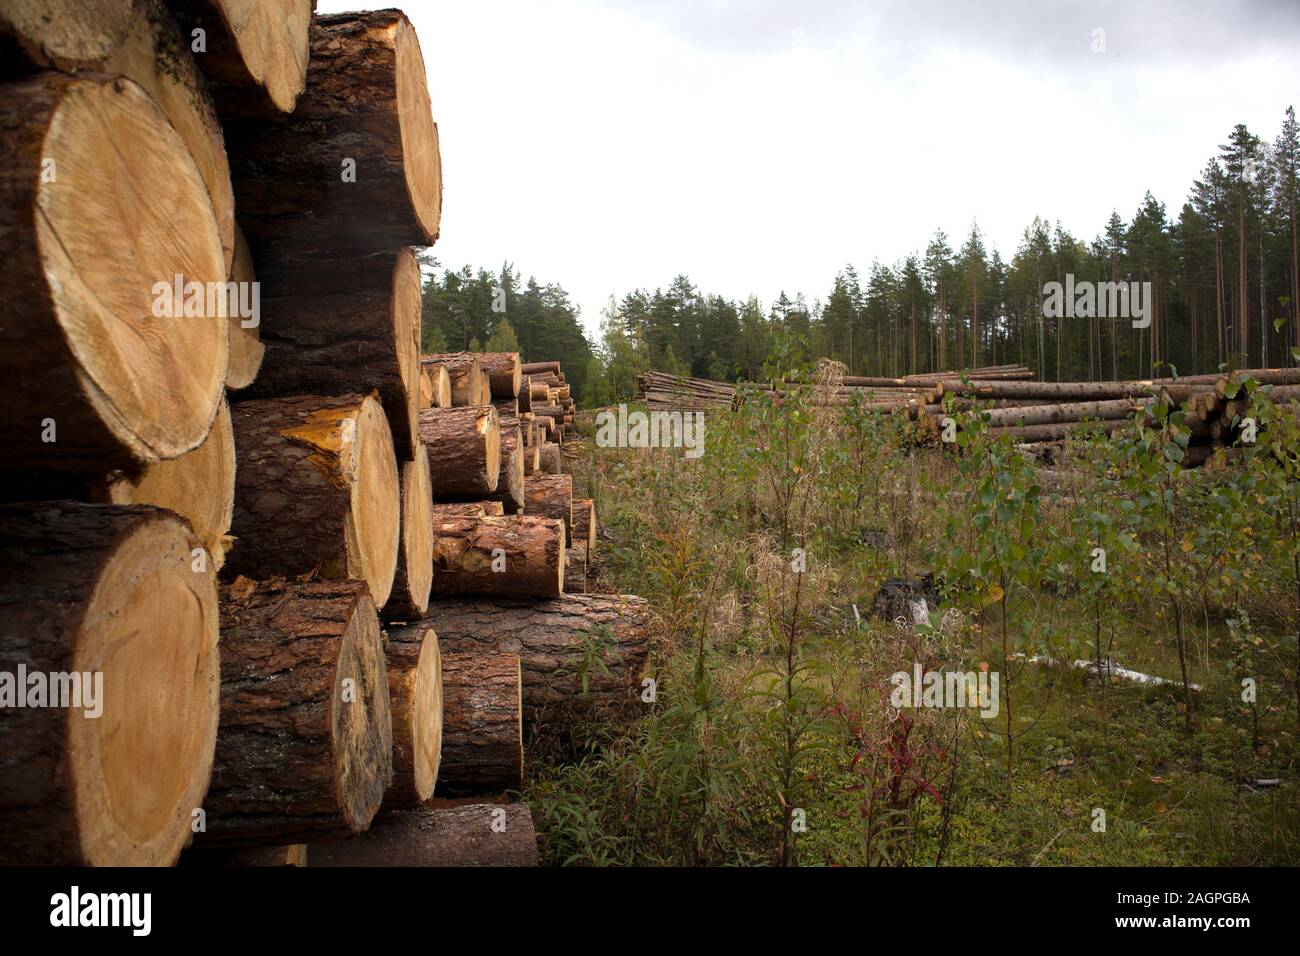 Forest edge with saw mill, stacks of pine logs against pine forest Stock Photo